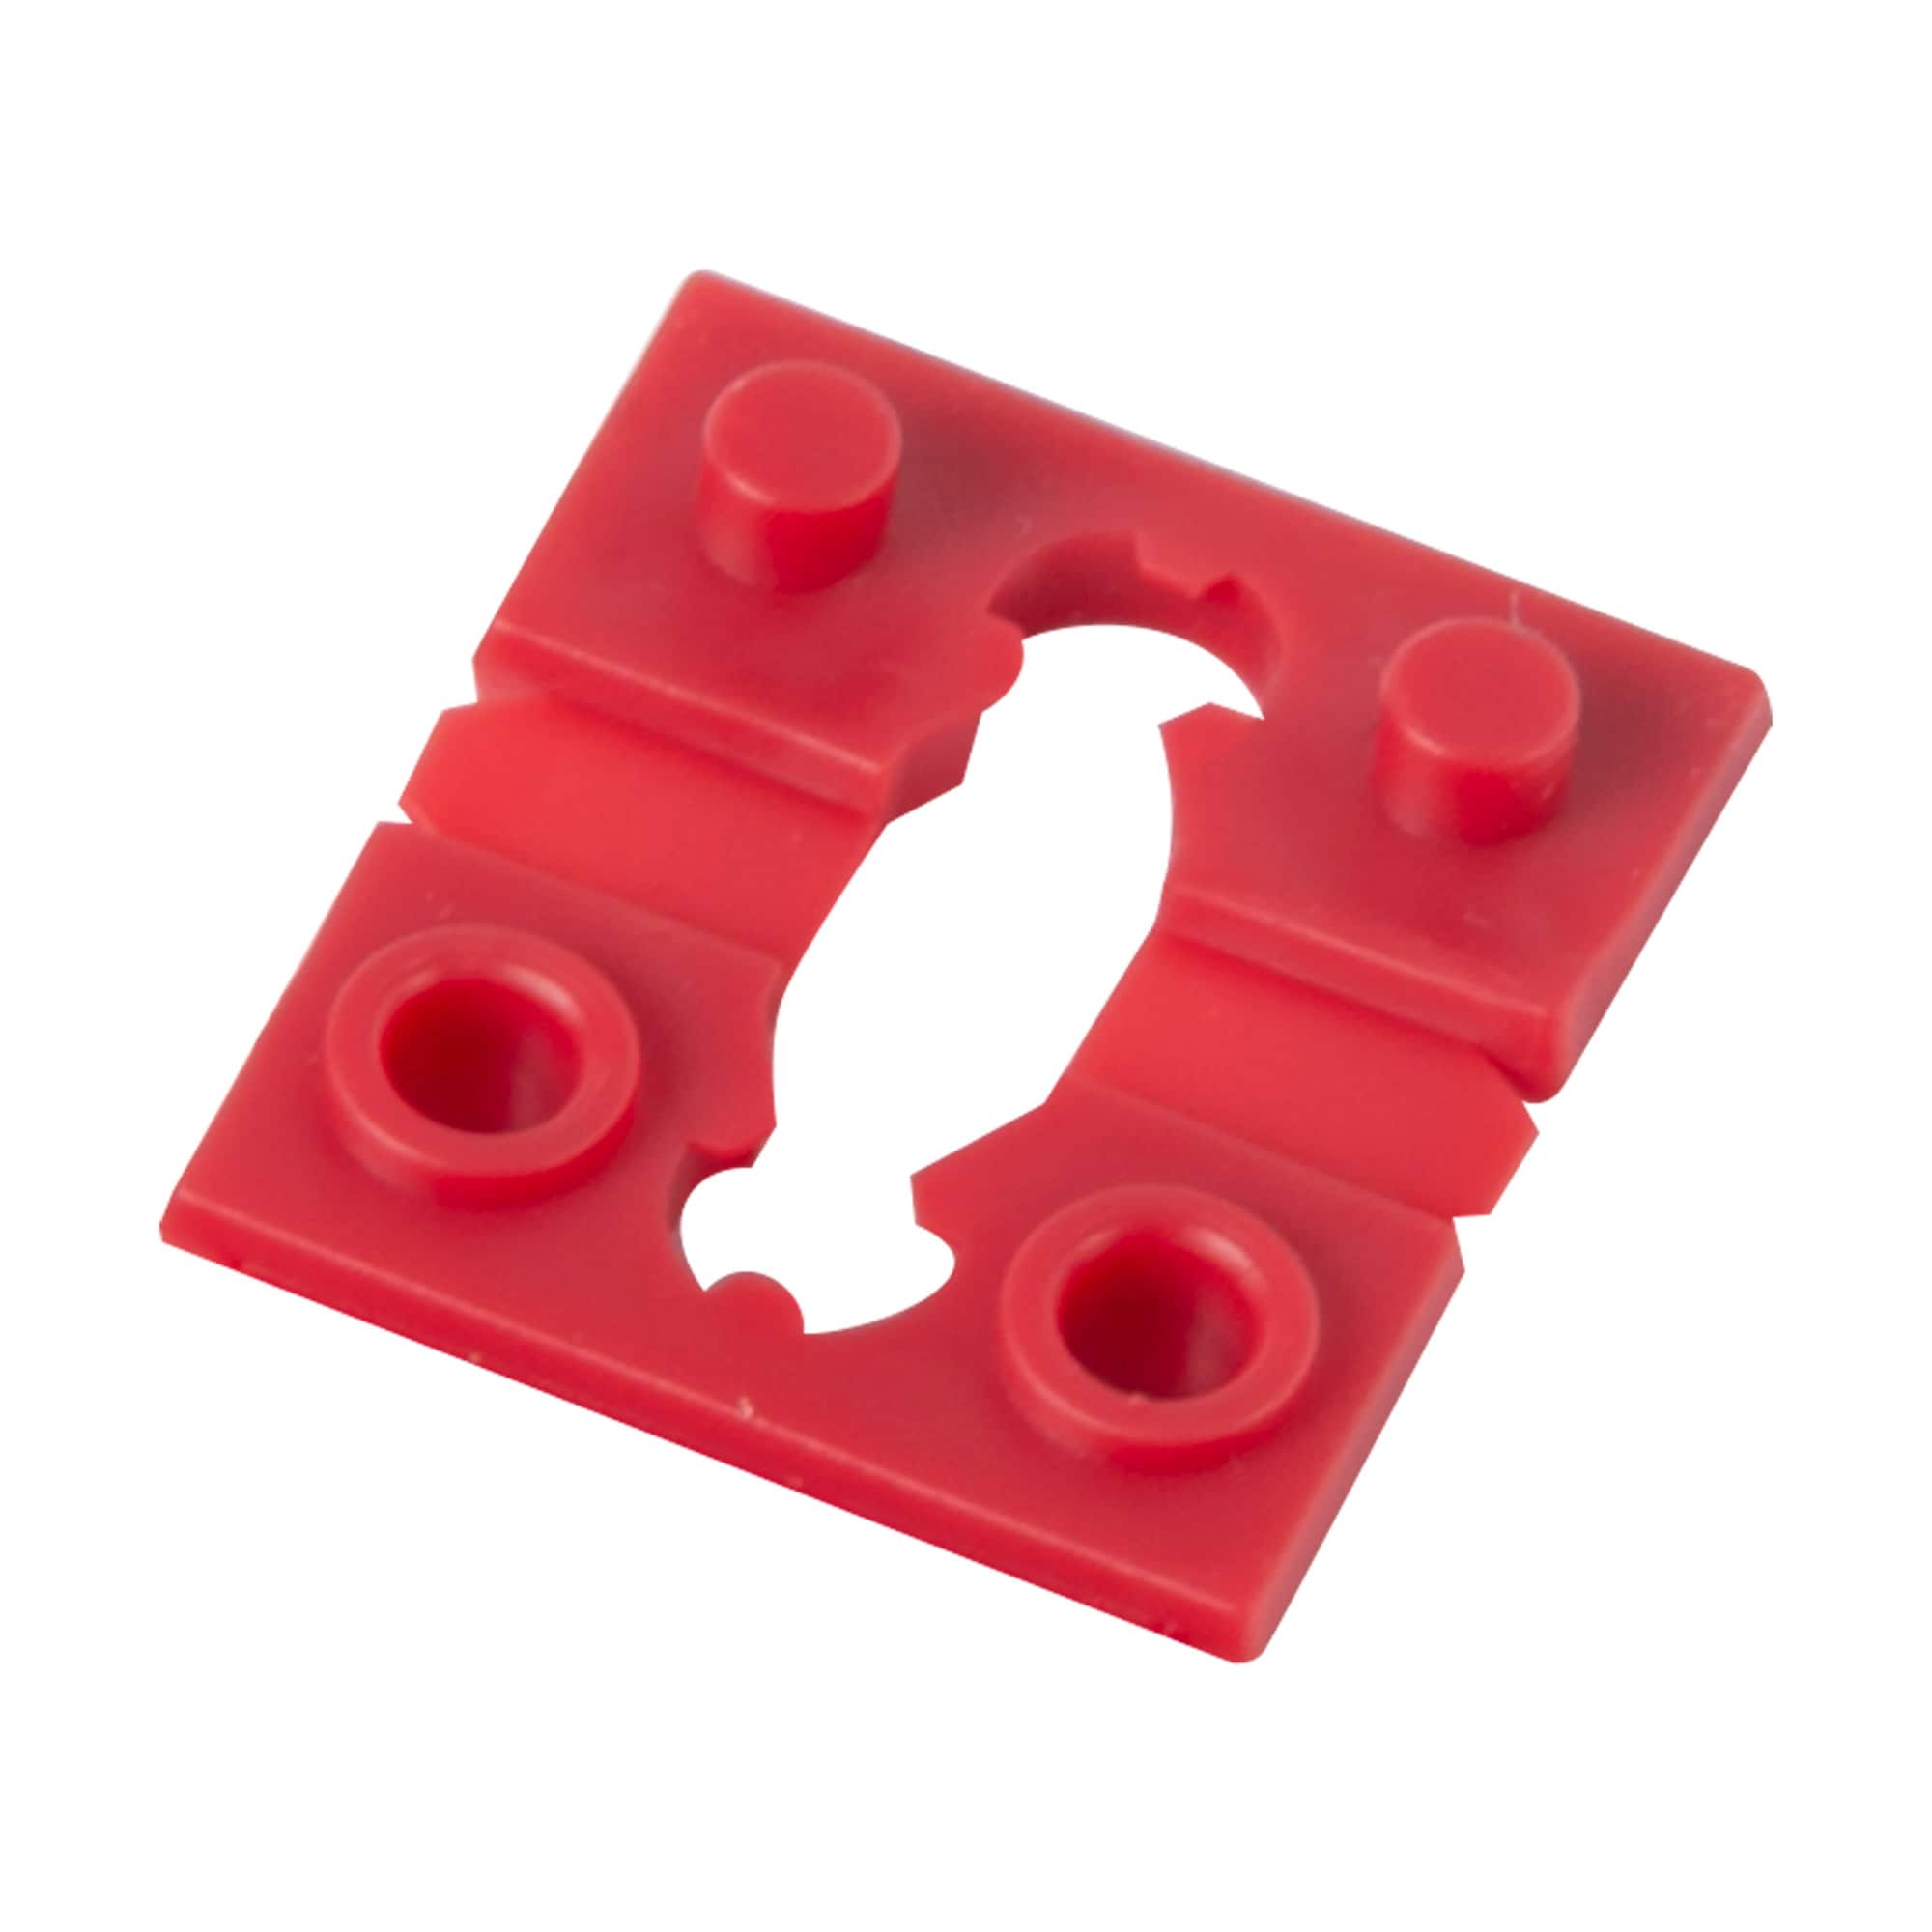 LEGO PIECES LIGHT SWITCH COVER PLATES OUTLET RED BLUE YELLOW GREEN FREE SHIPPING 